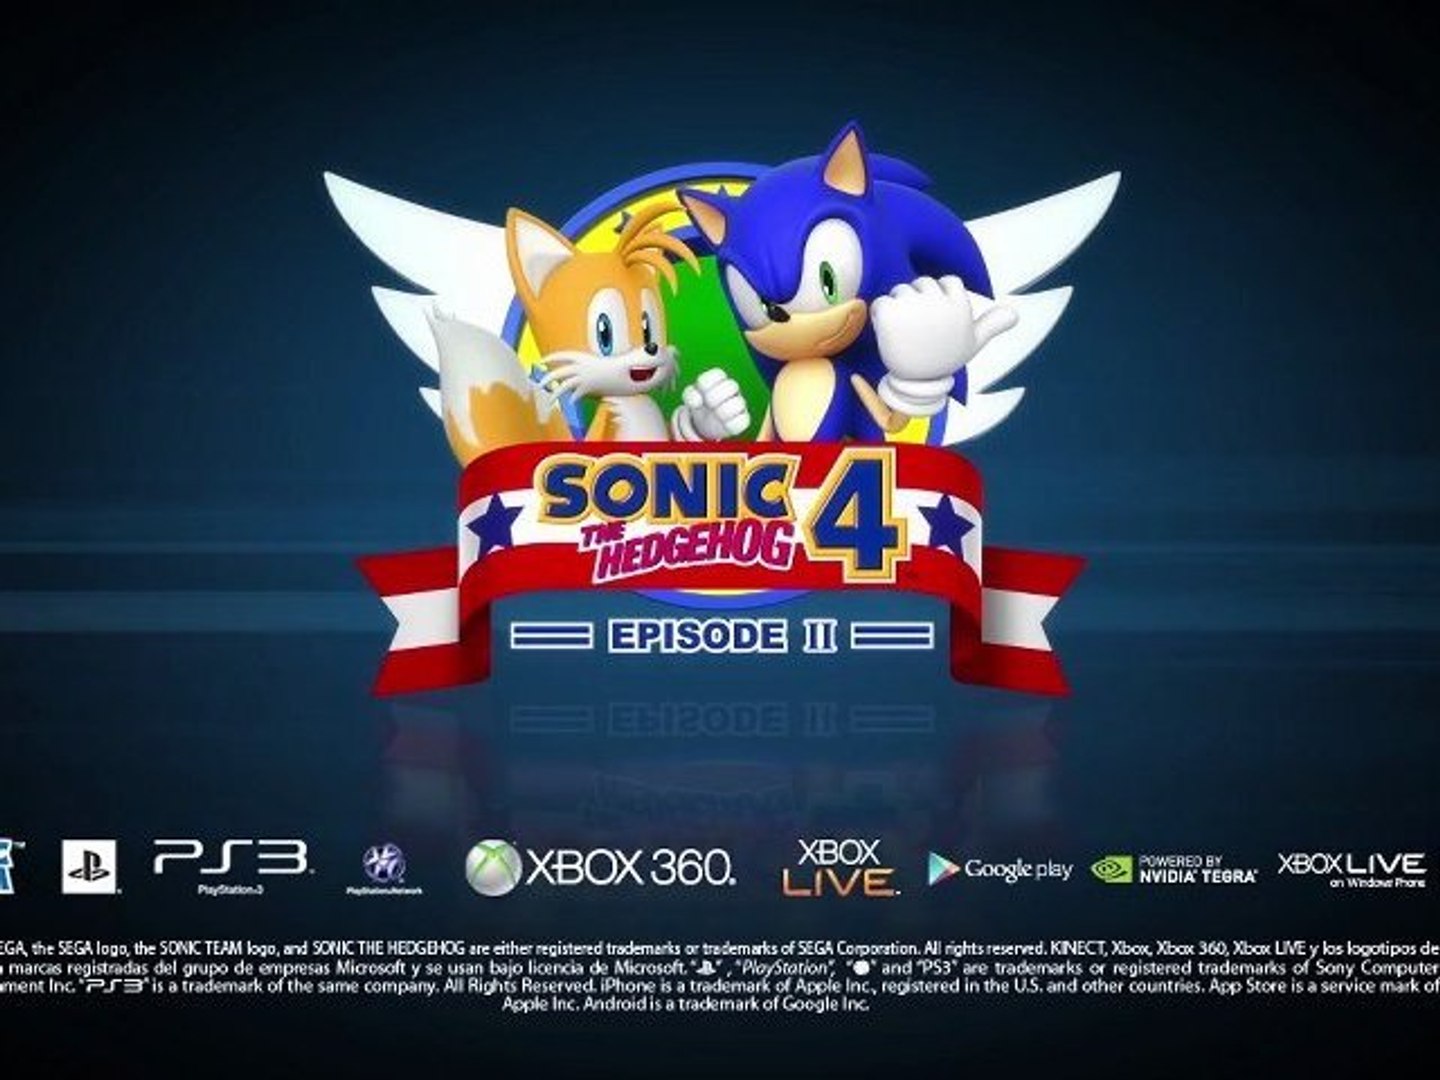 Sonic The Hedgehog 4 Episodio 2 trailer - Vídeo Dailymotion